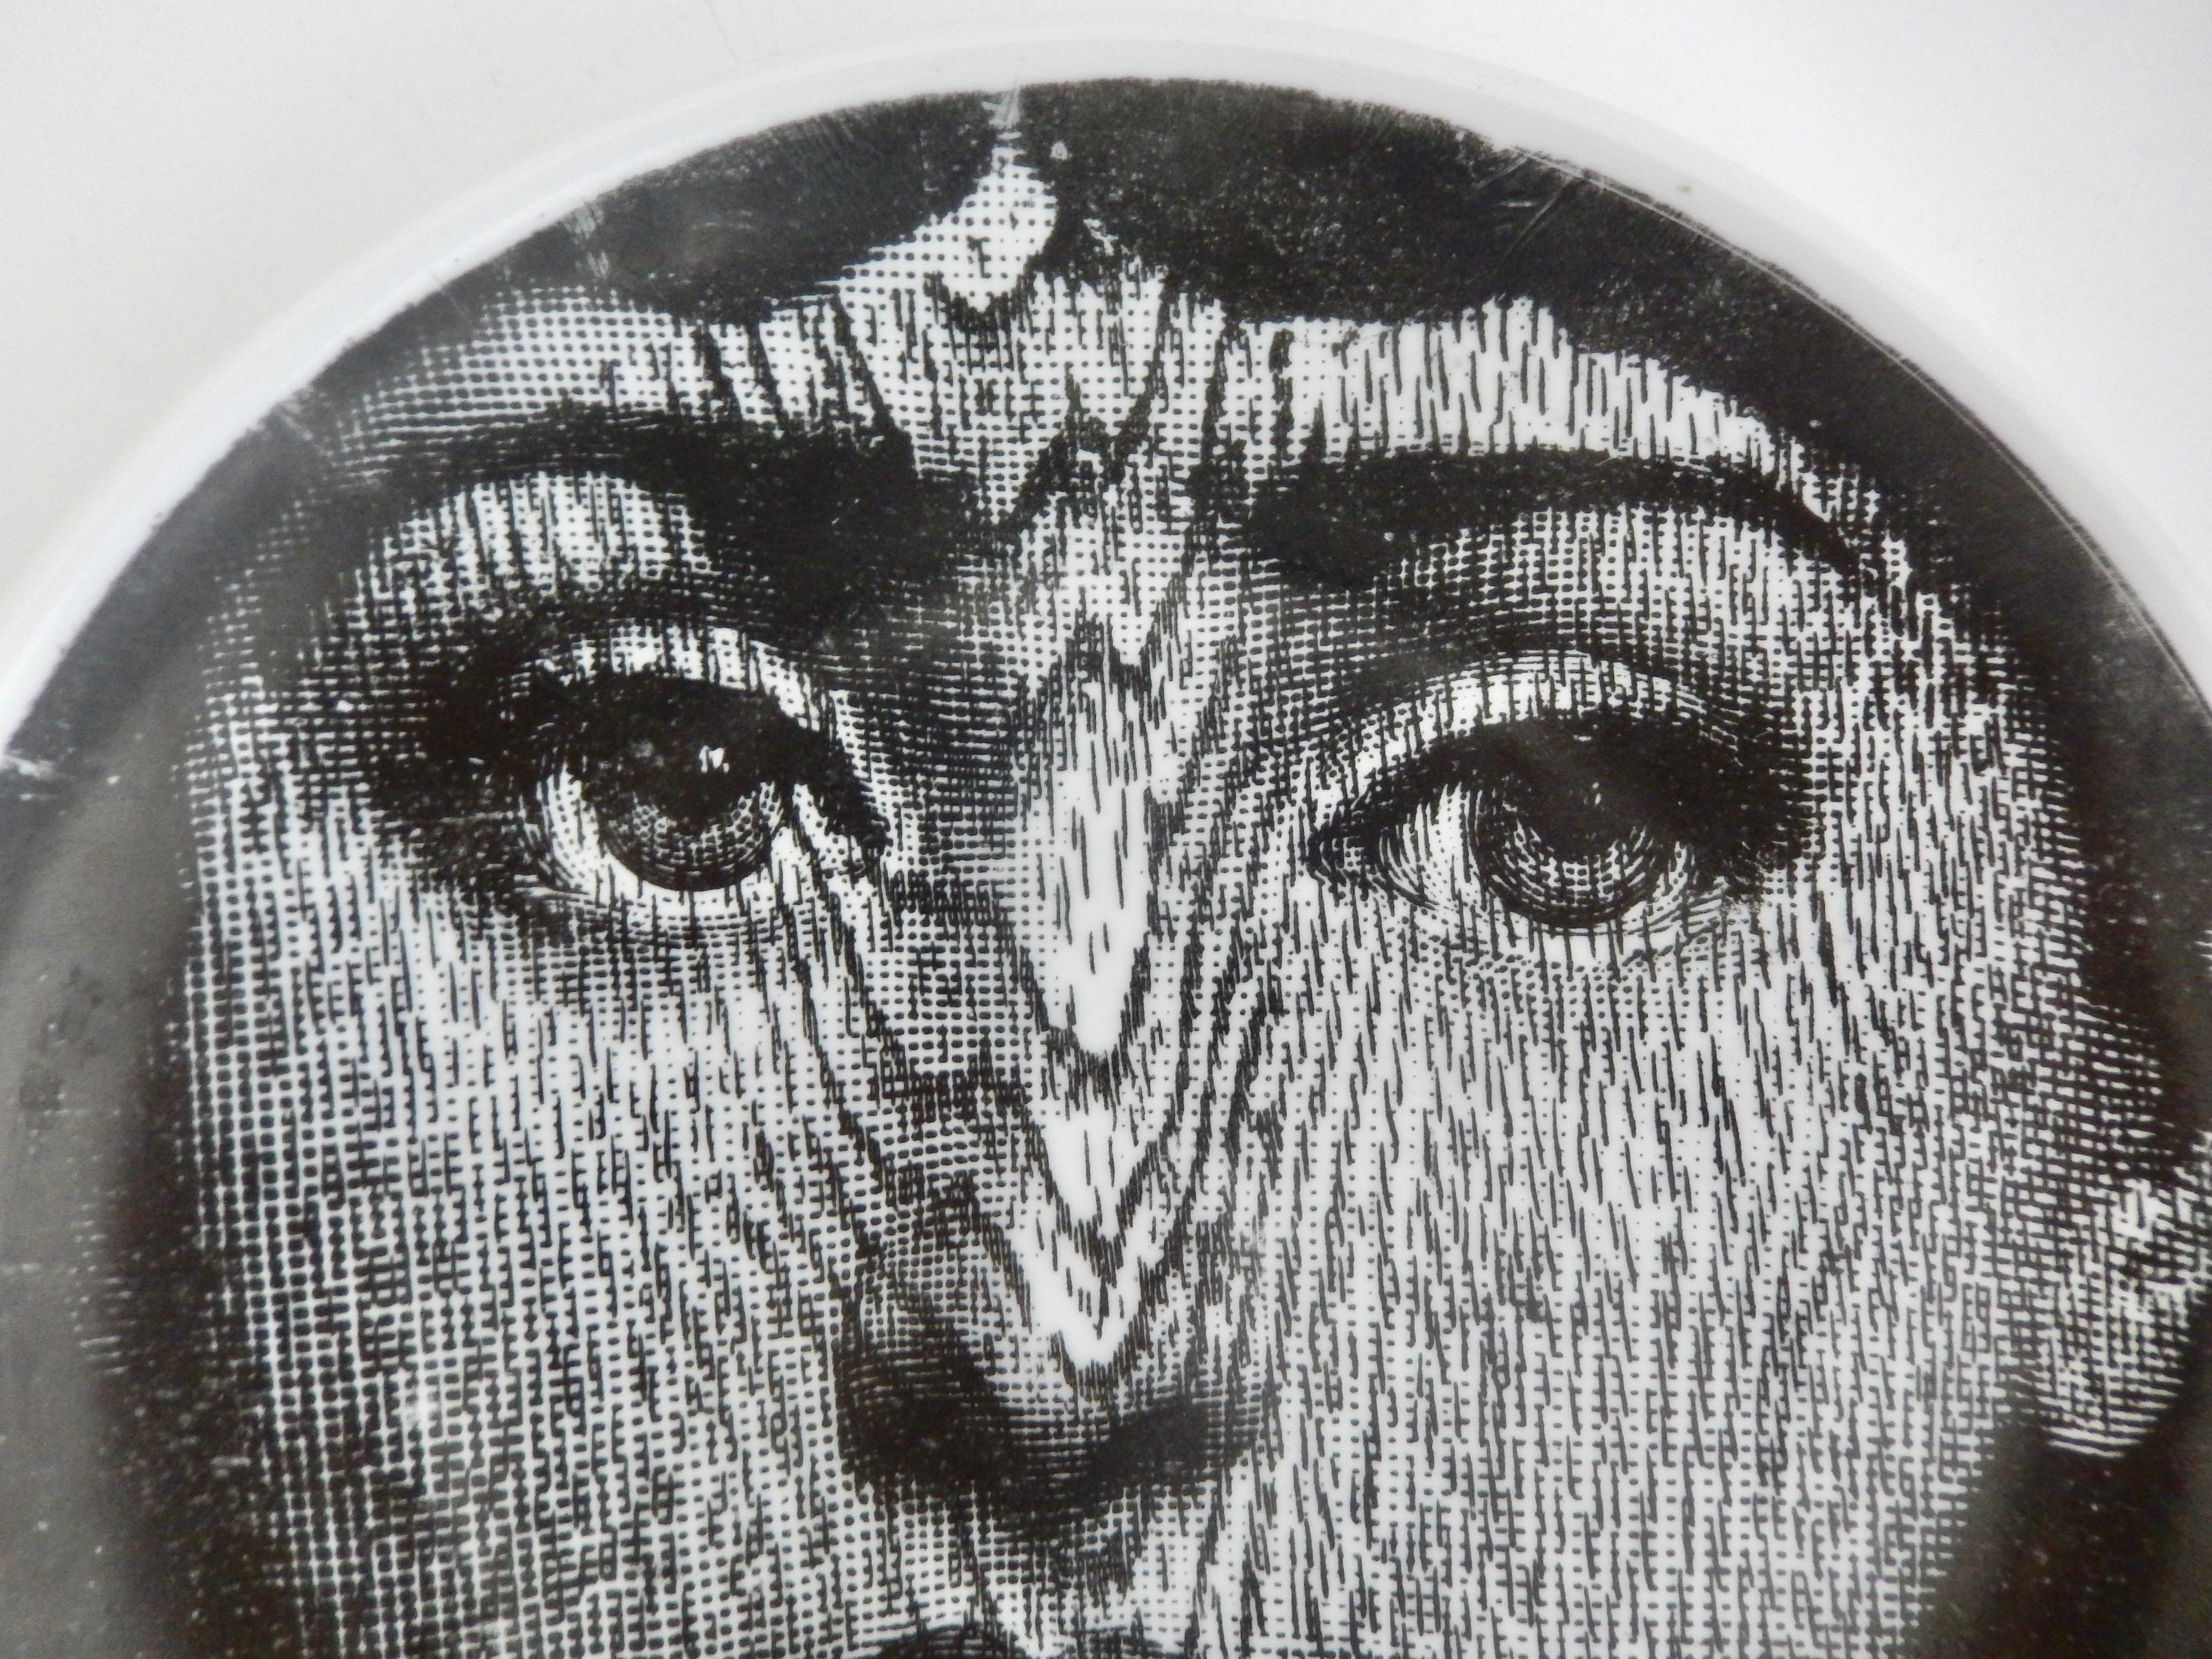 Mid-20th Century Midcentury Fornasetti Face Plate, Tema e Variazione N90 For Sale